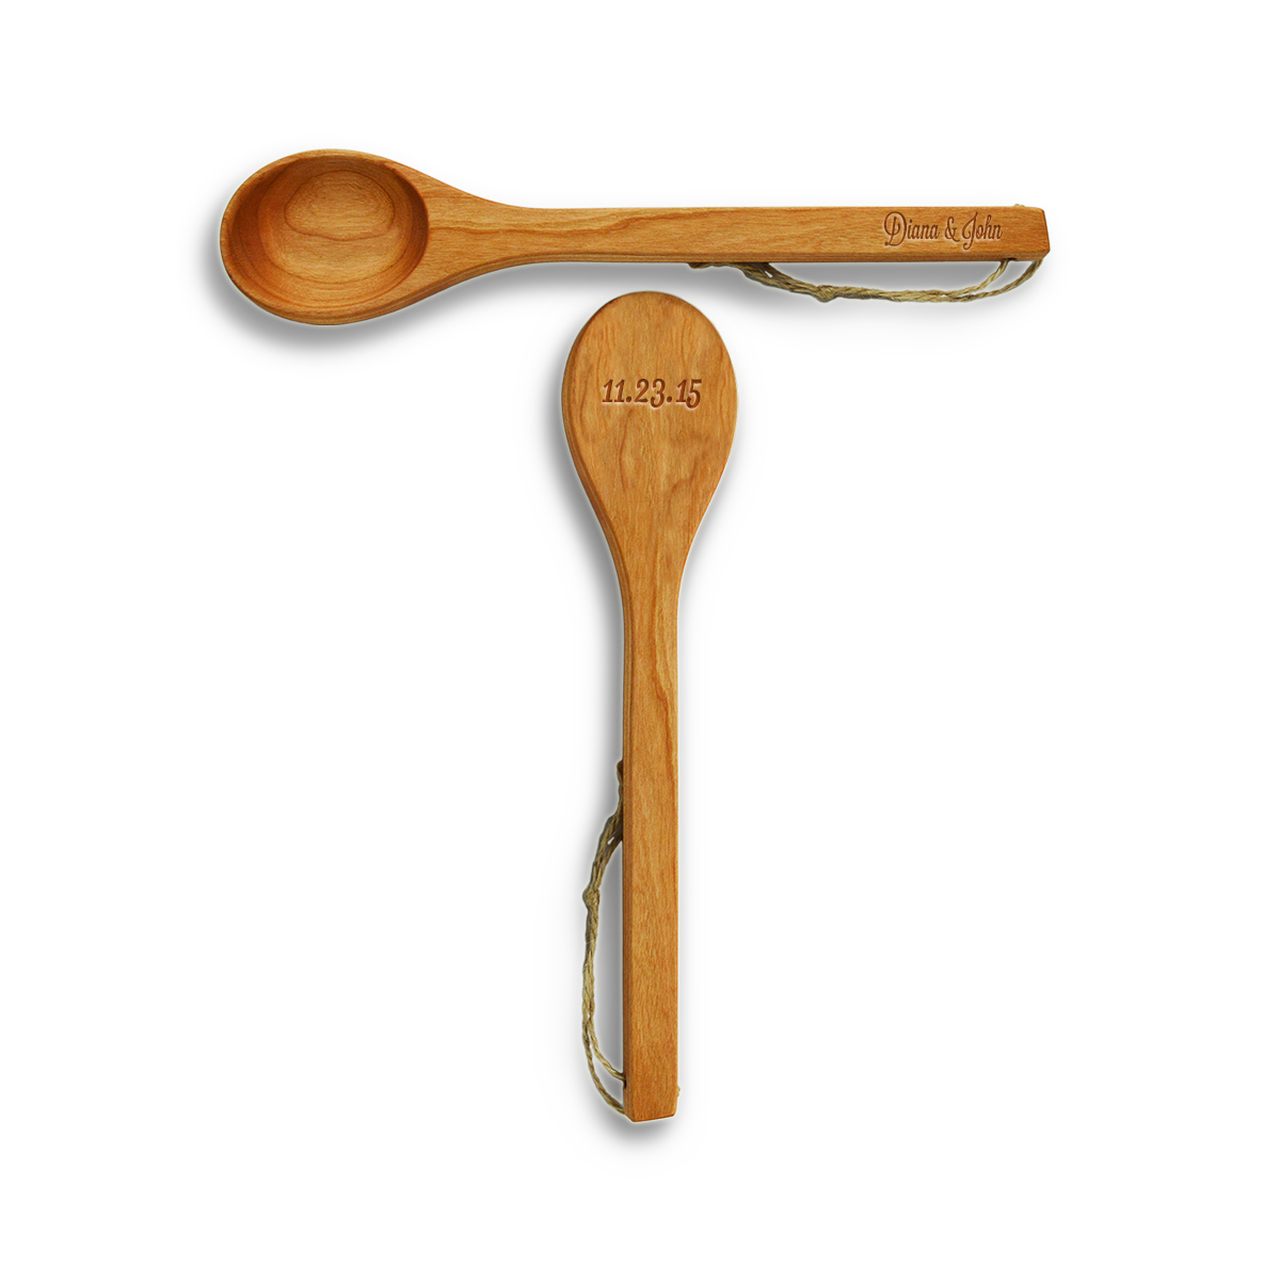 This is Engraved Wedding & Anniversary Cherry Wooden Spoon